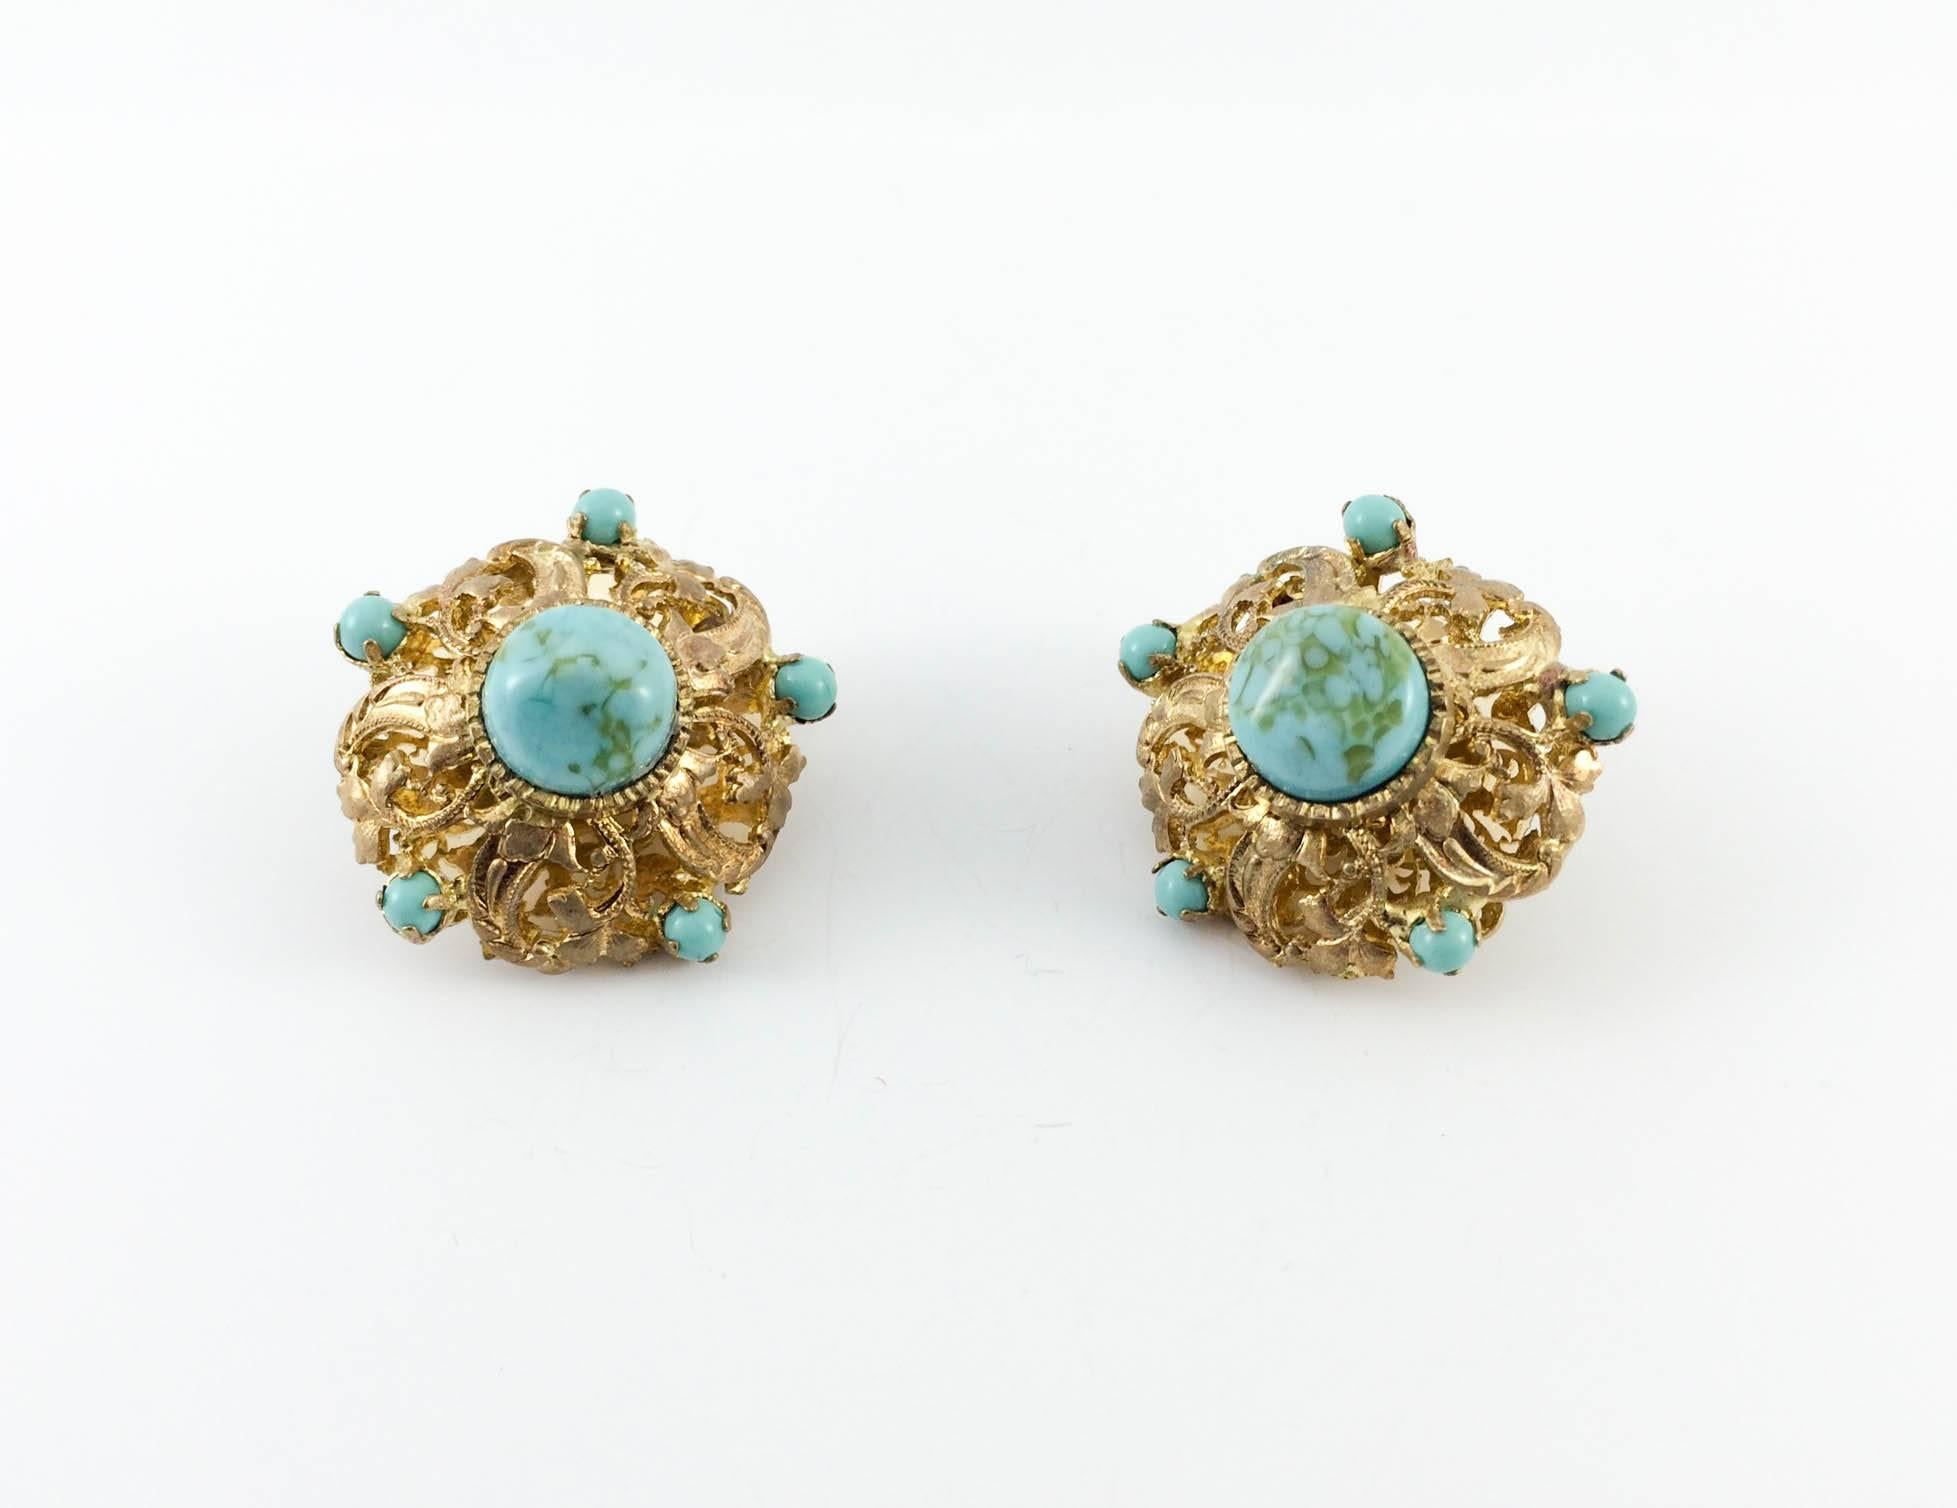 Important Chanel Gripoix Clip-on Earrings. These stunning earrings date back from the 1950s. They feature blue gripoix emulating turquoise and intricate work on gilt metal. Chanel signed. Part of the Chanel costume jewellery line, they were made by